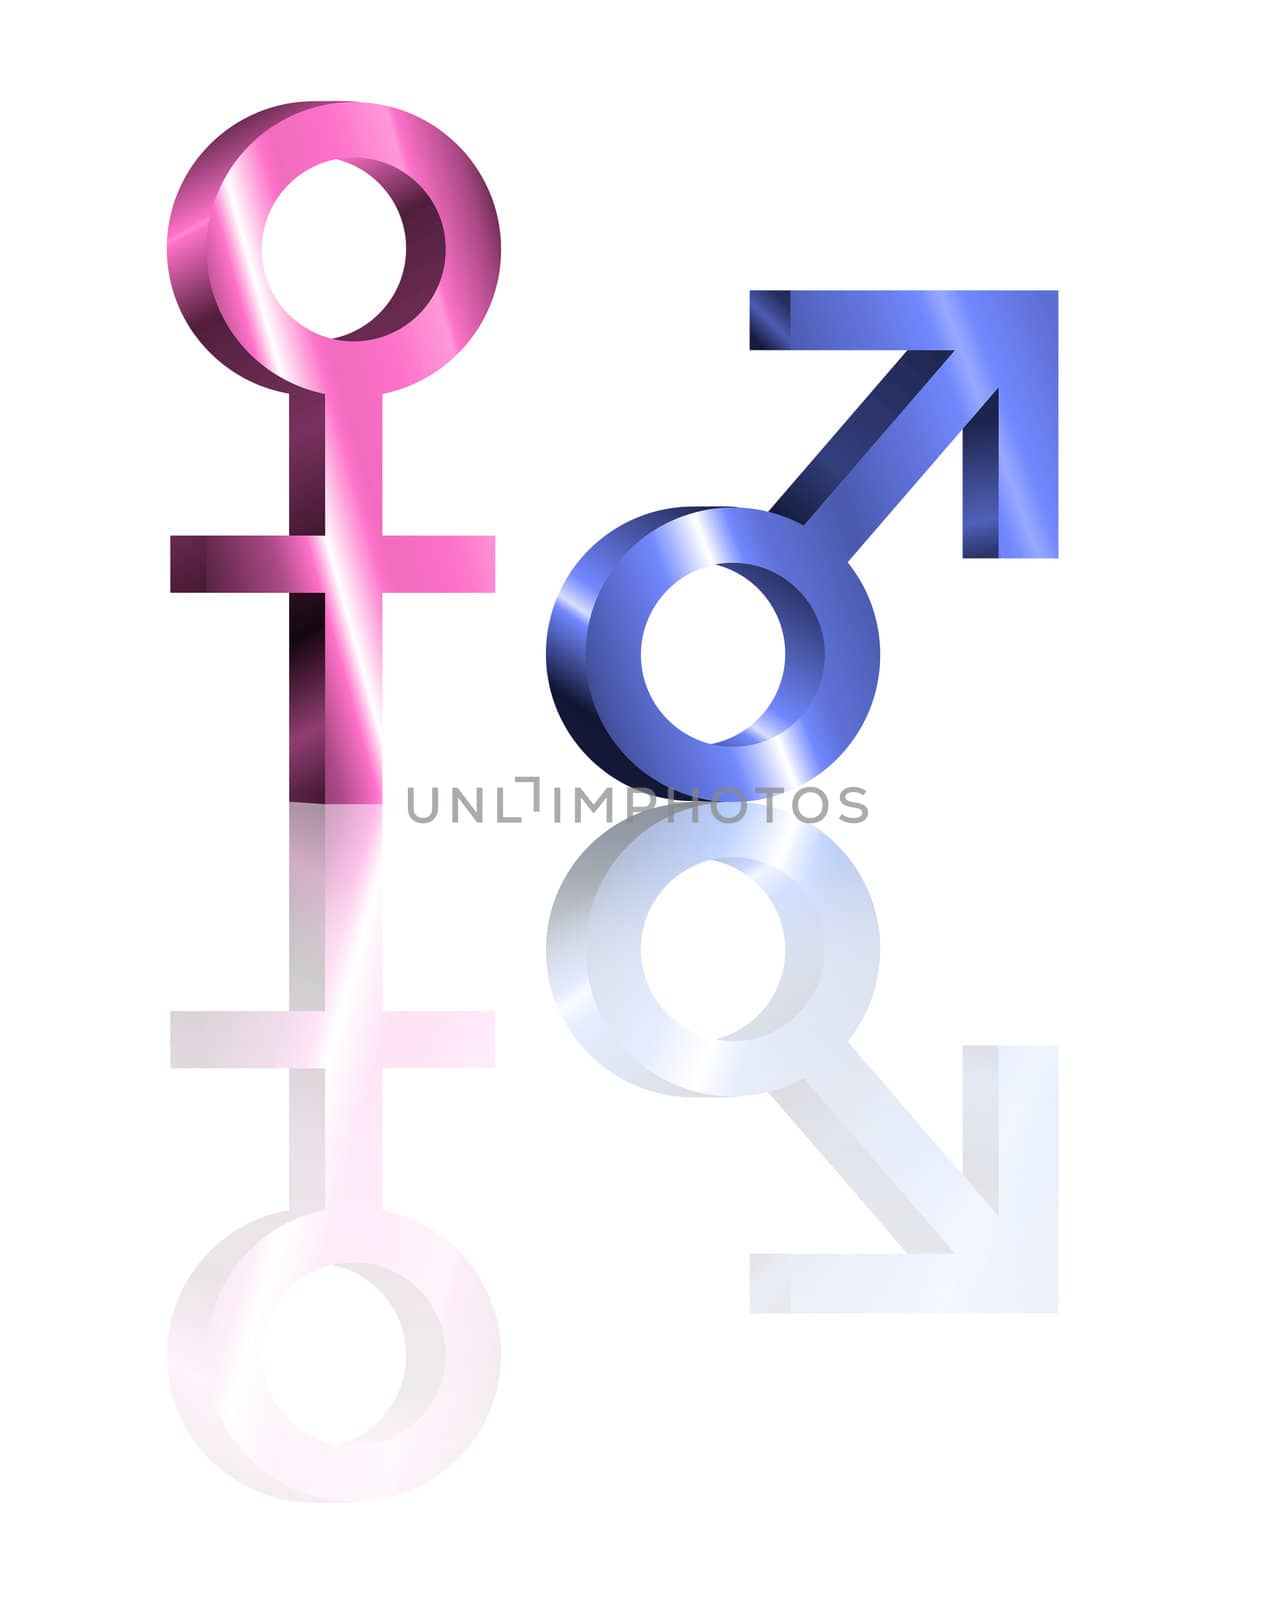 Illustration depicting metallic blue and pink male and female symbols arranged over white and reflecting into the foreground.